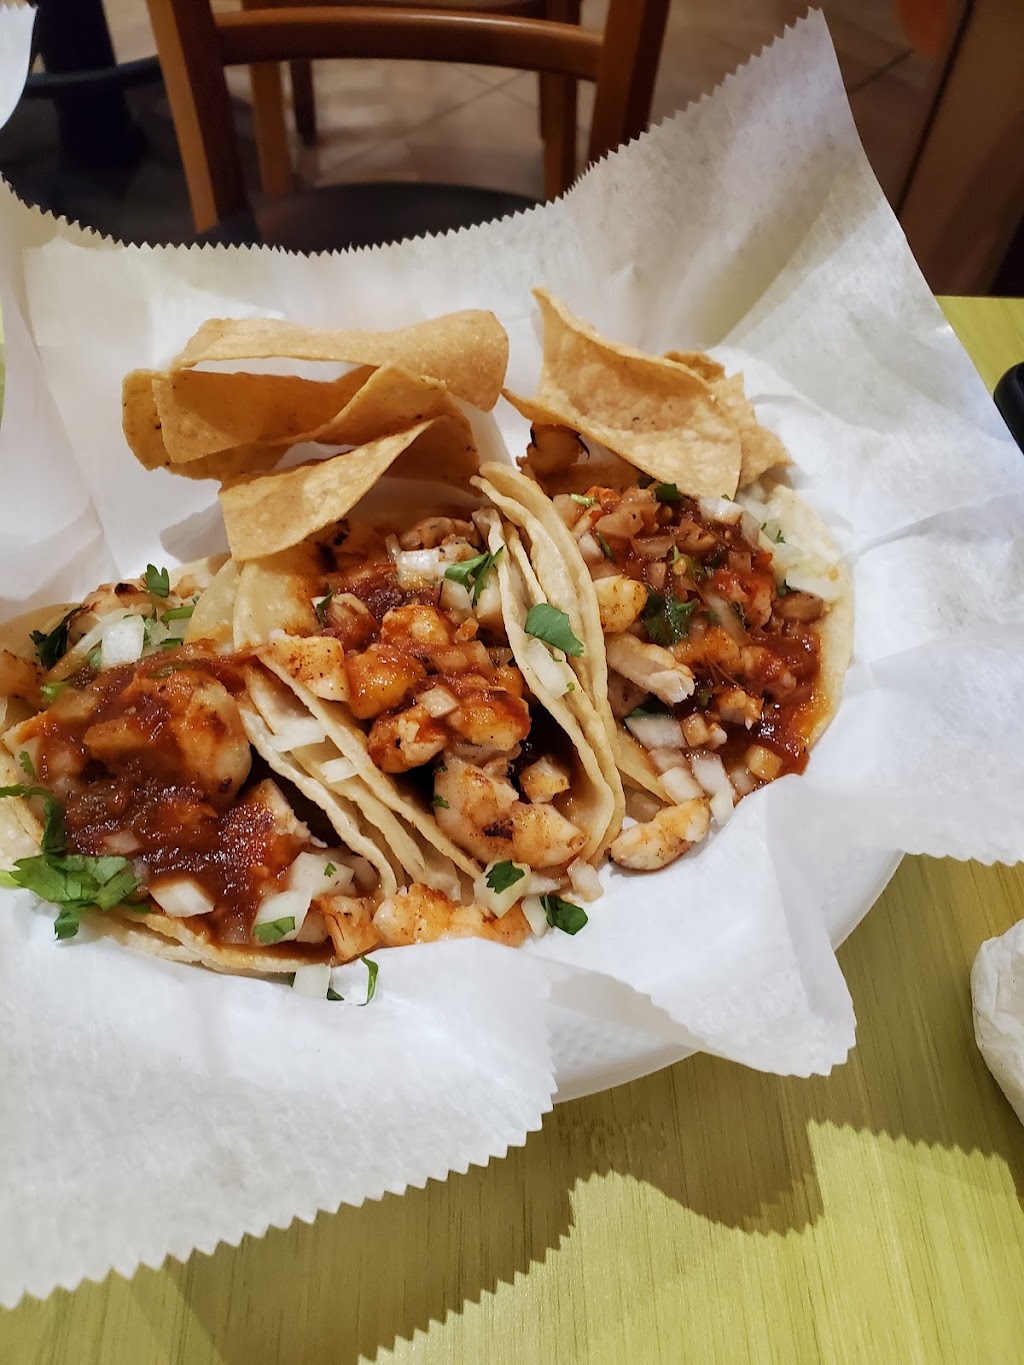 Green Cactus Fresh Mexican Grill | 1099 N Country Rd, Stony Brook, NY 11790 | Phone: (631) 751-0700